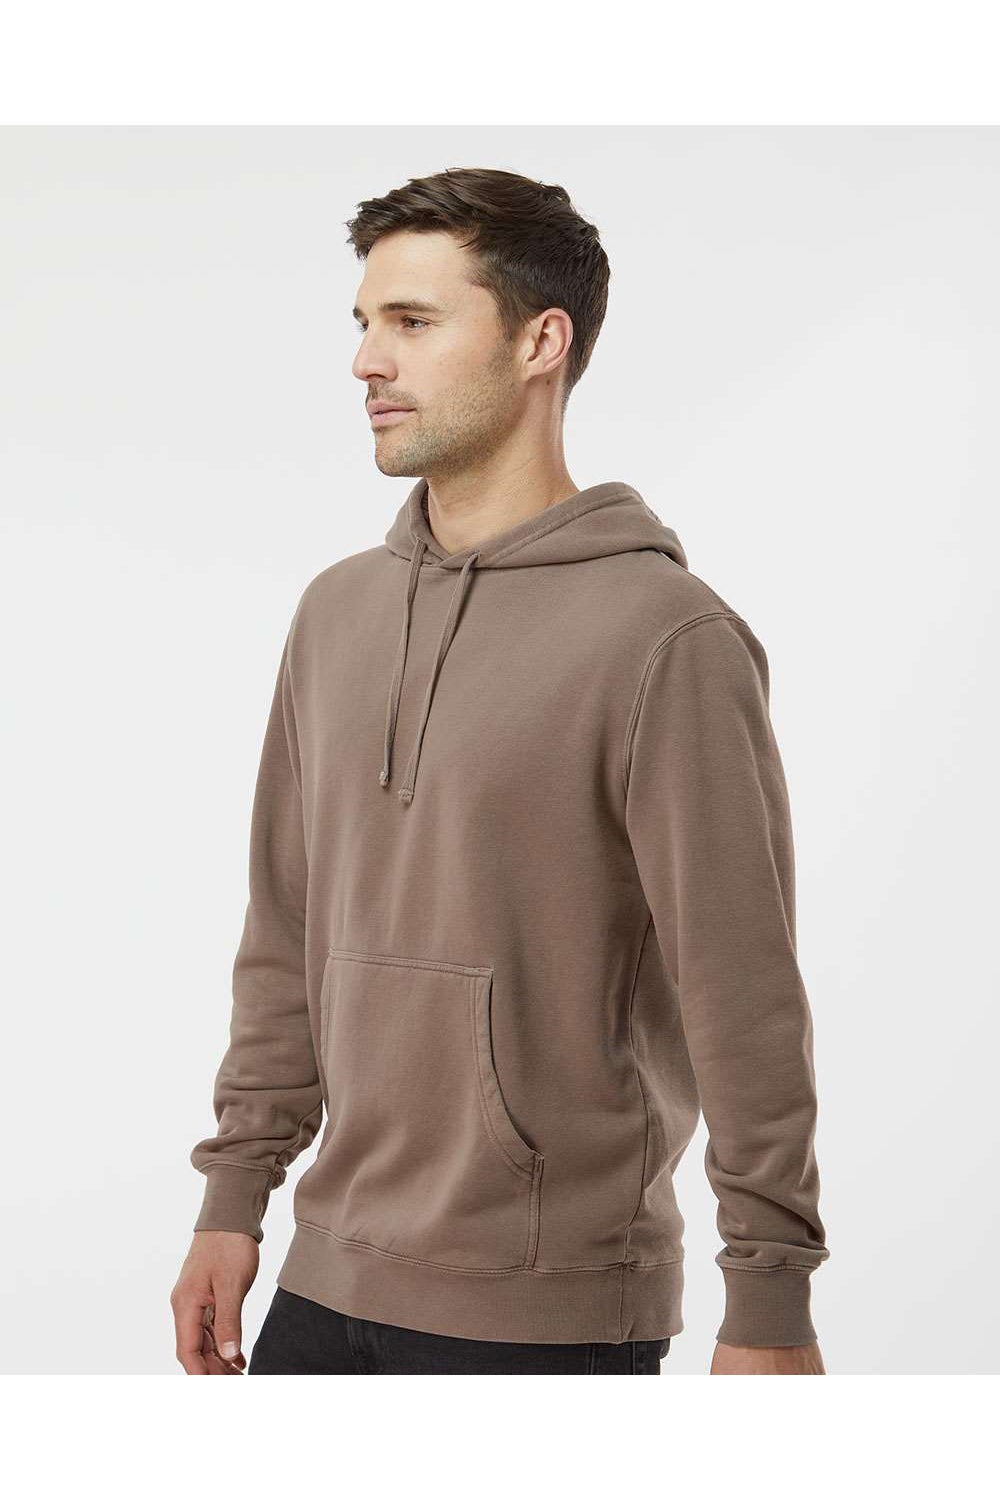 Independent Trading Co. PRM4500 Mens Pigment Dyed Hooded Sweatshirt Hoodie Clay Brown Model Side